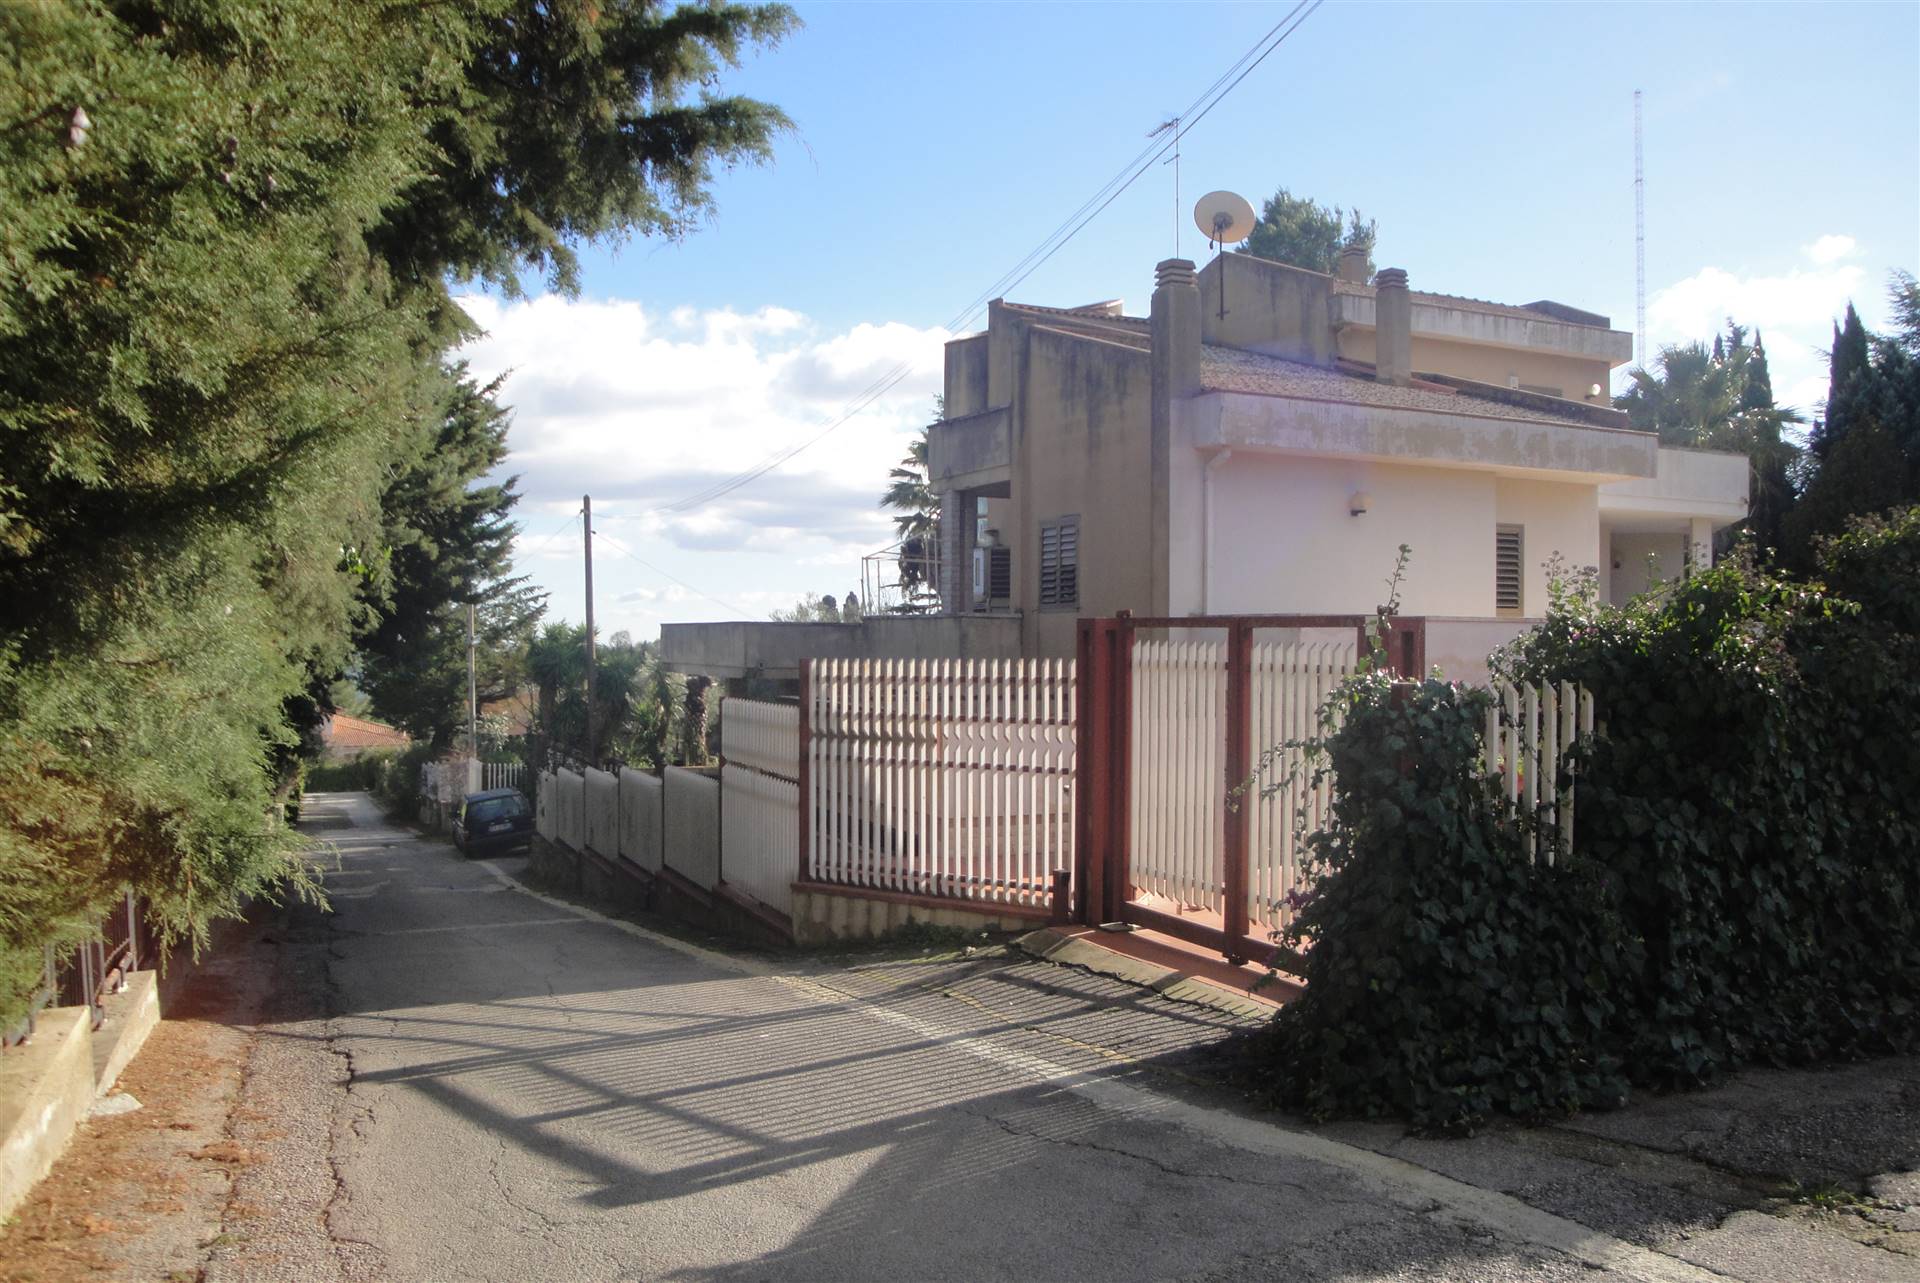 SANTO SPIRITO, S. GIULIANO, FIRRIO, CALTANISSETTA, Apartment for sale of 369 Sq. mt., Be restored, Heating Individual heating system, placed at 1°, 